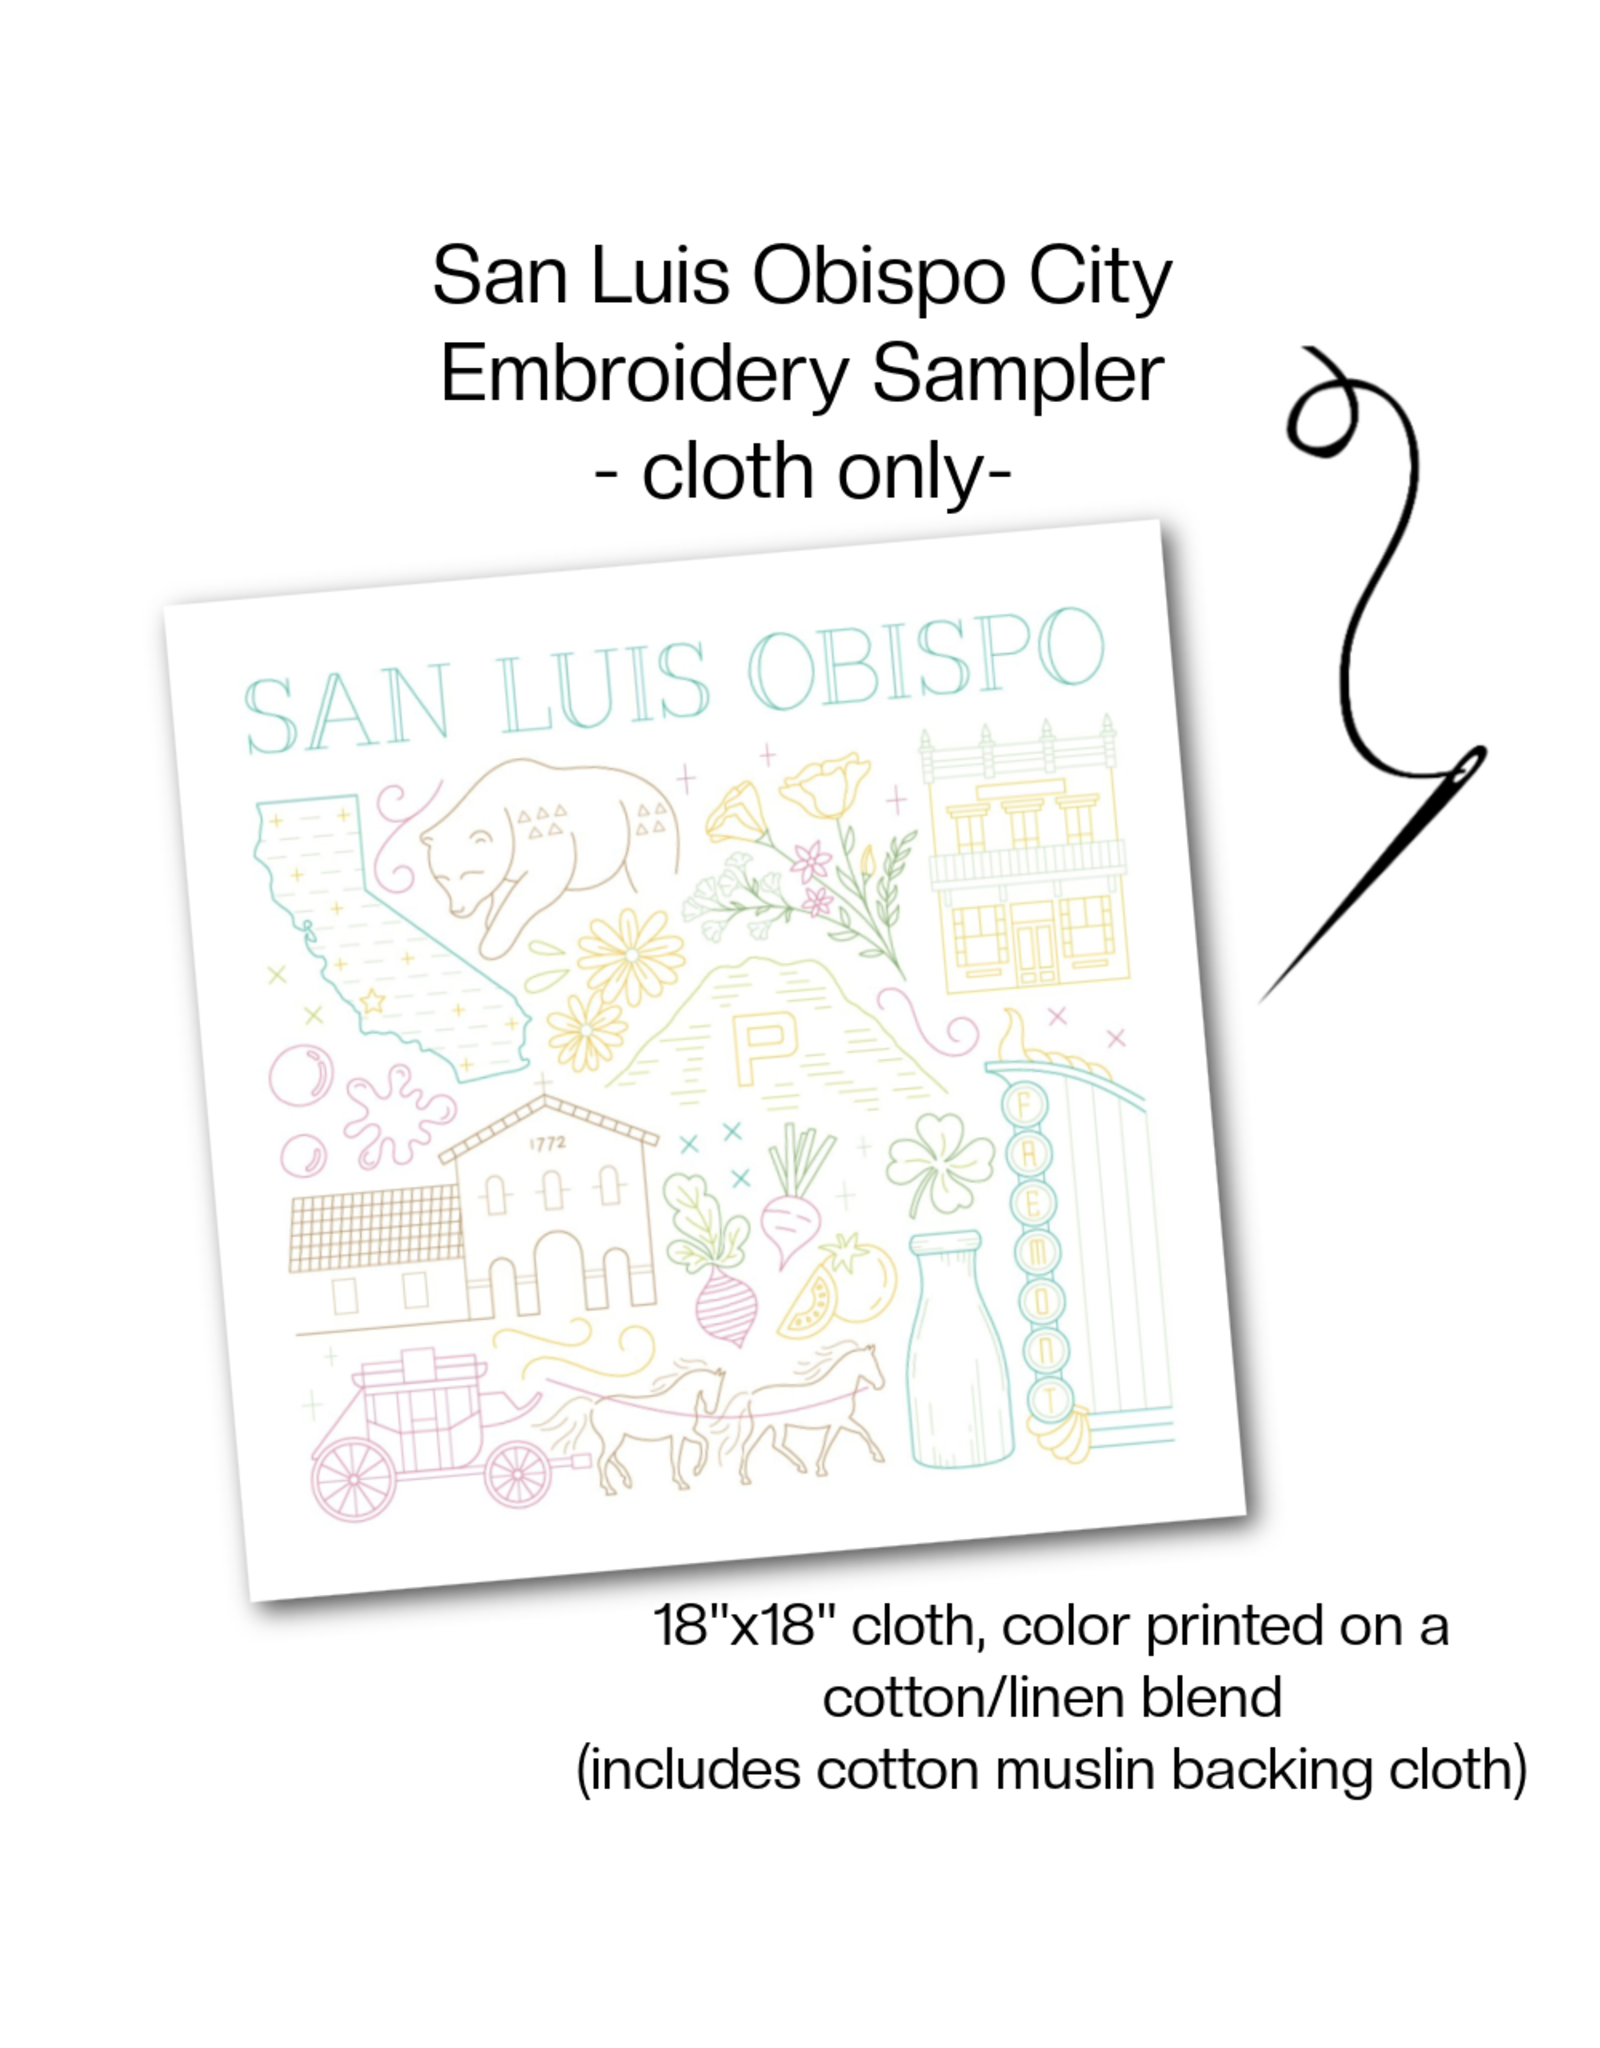 Cedar O'Reilly SLO City Embroidery Sampler (sampler cloth and backing cloth only)